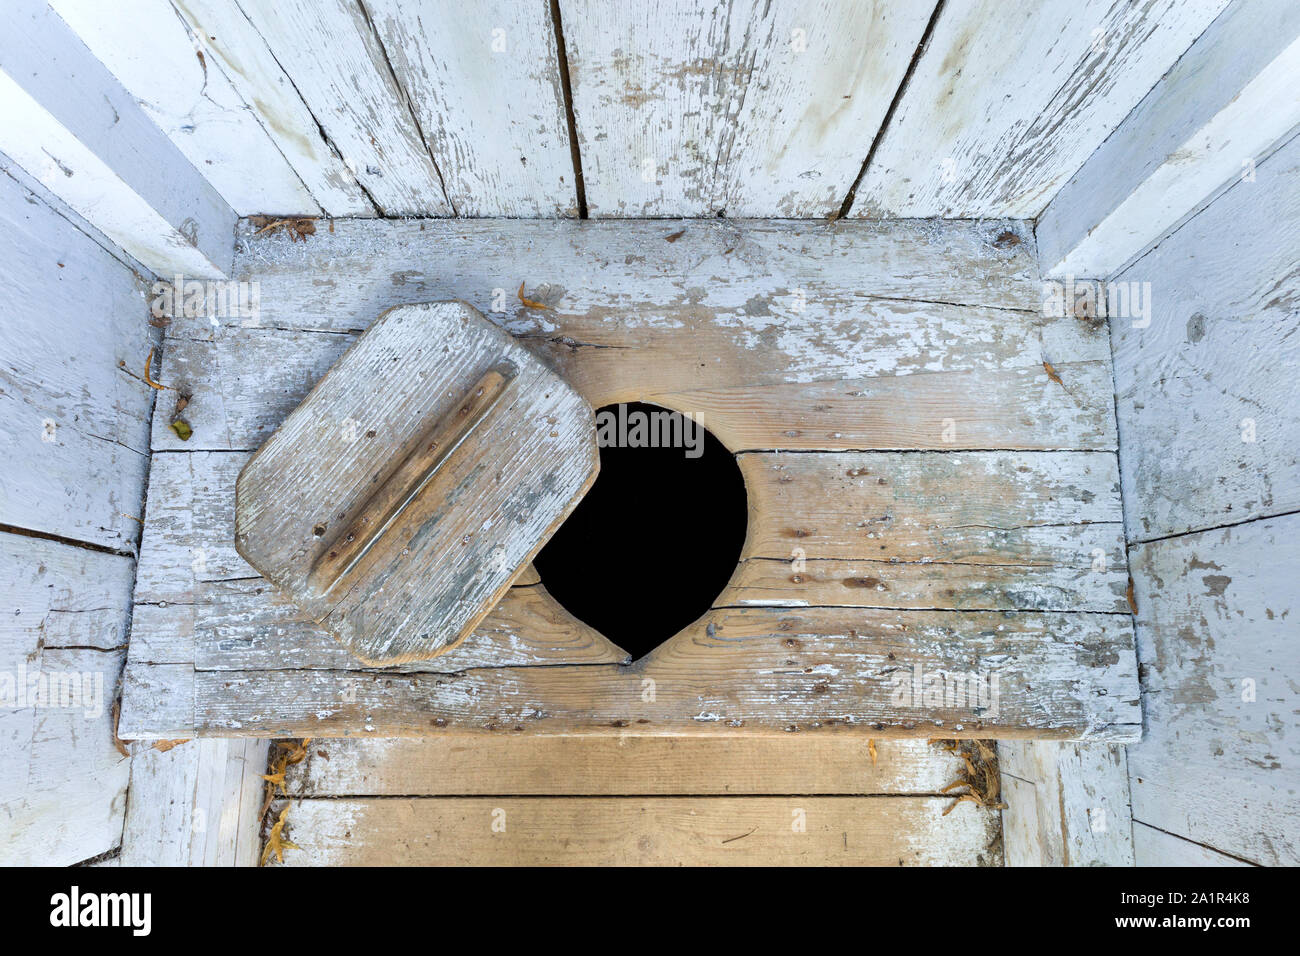 interior of an old wooden outhouse Stock Photo